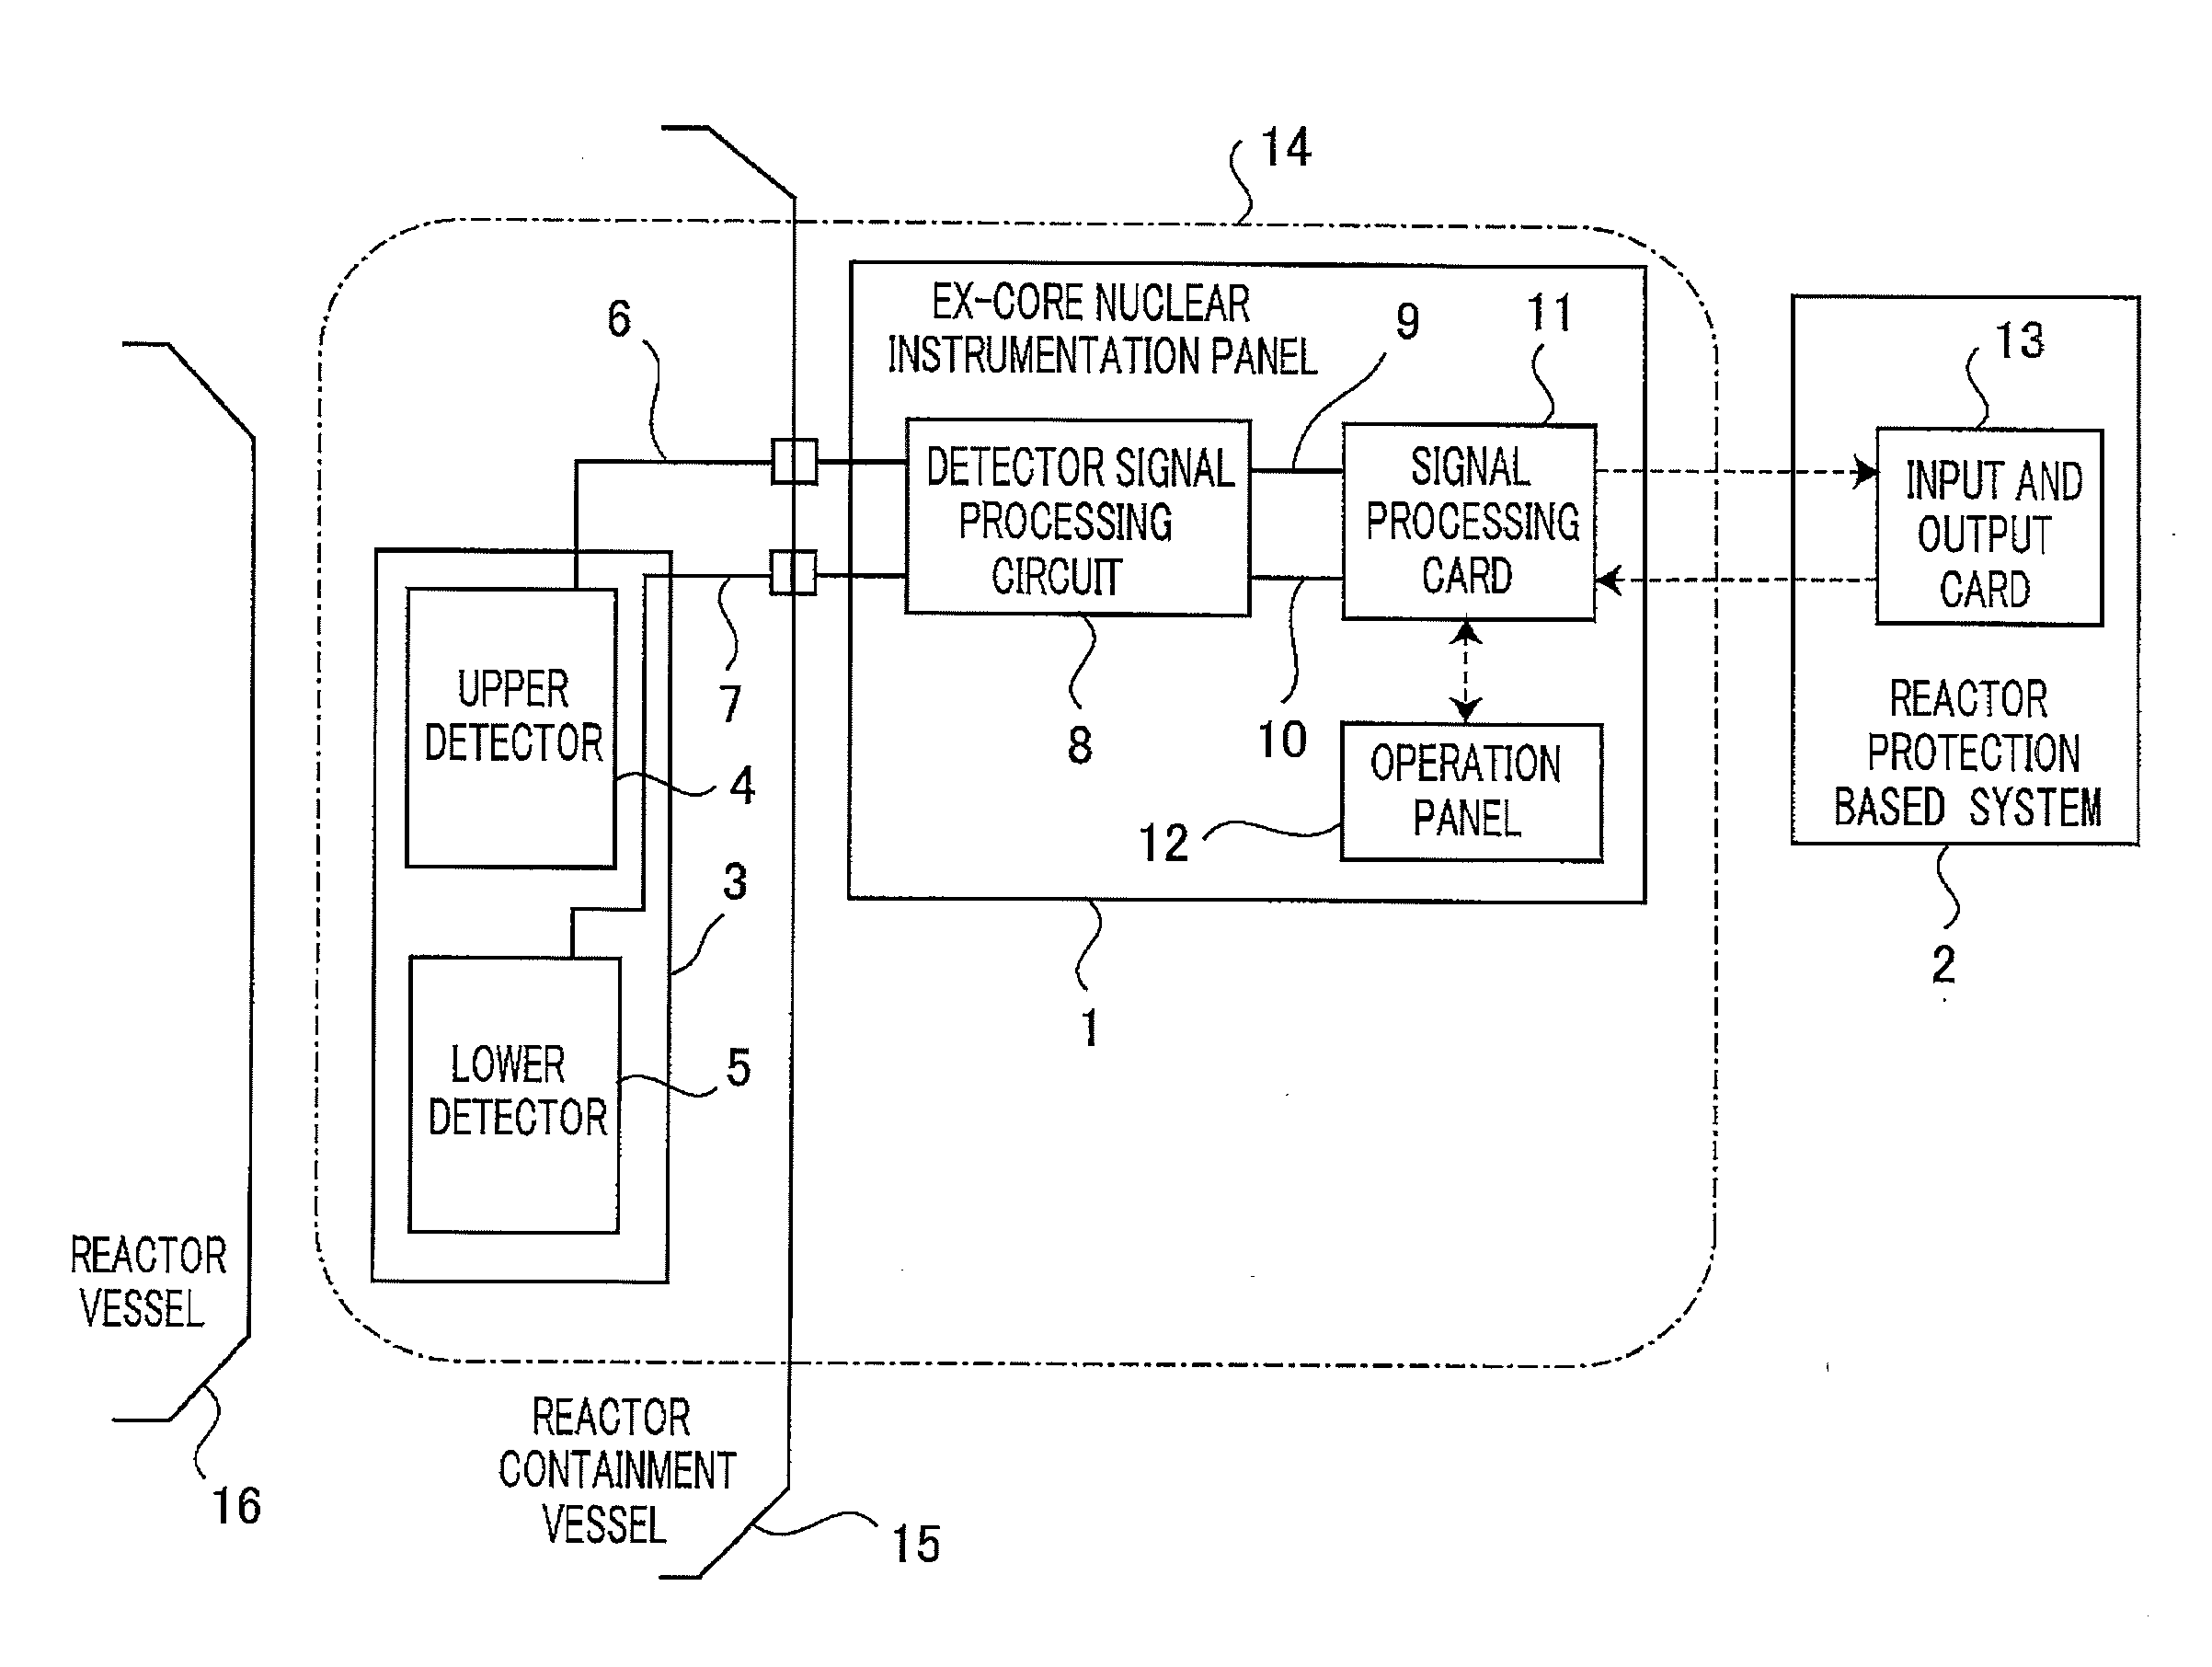 Ex-core nuclear instrumentation system